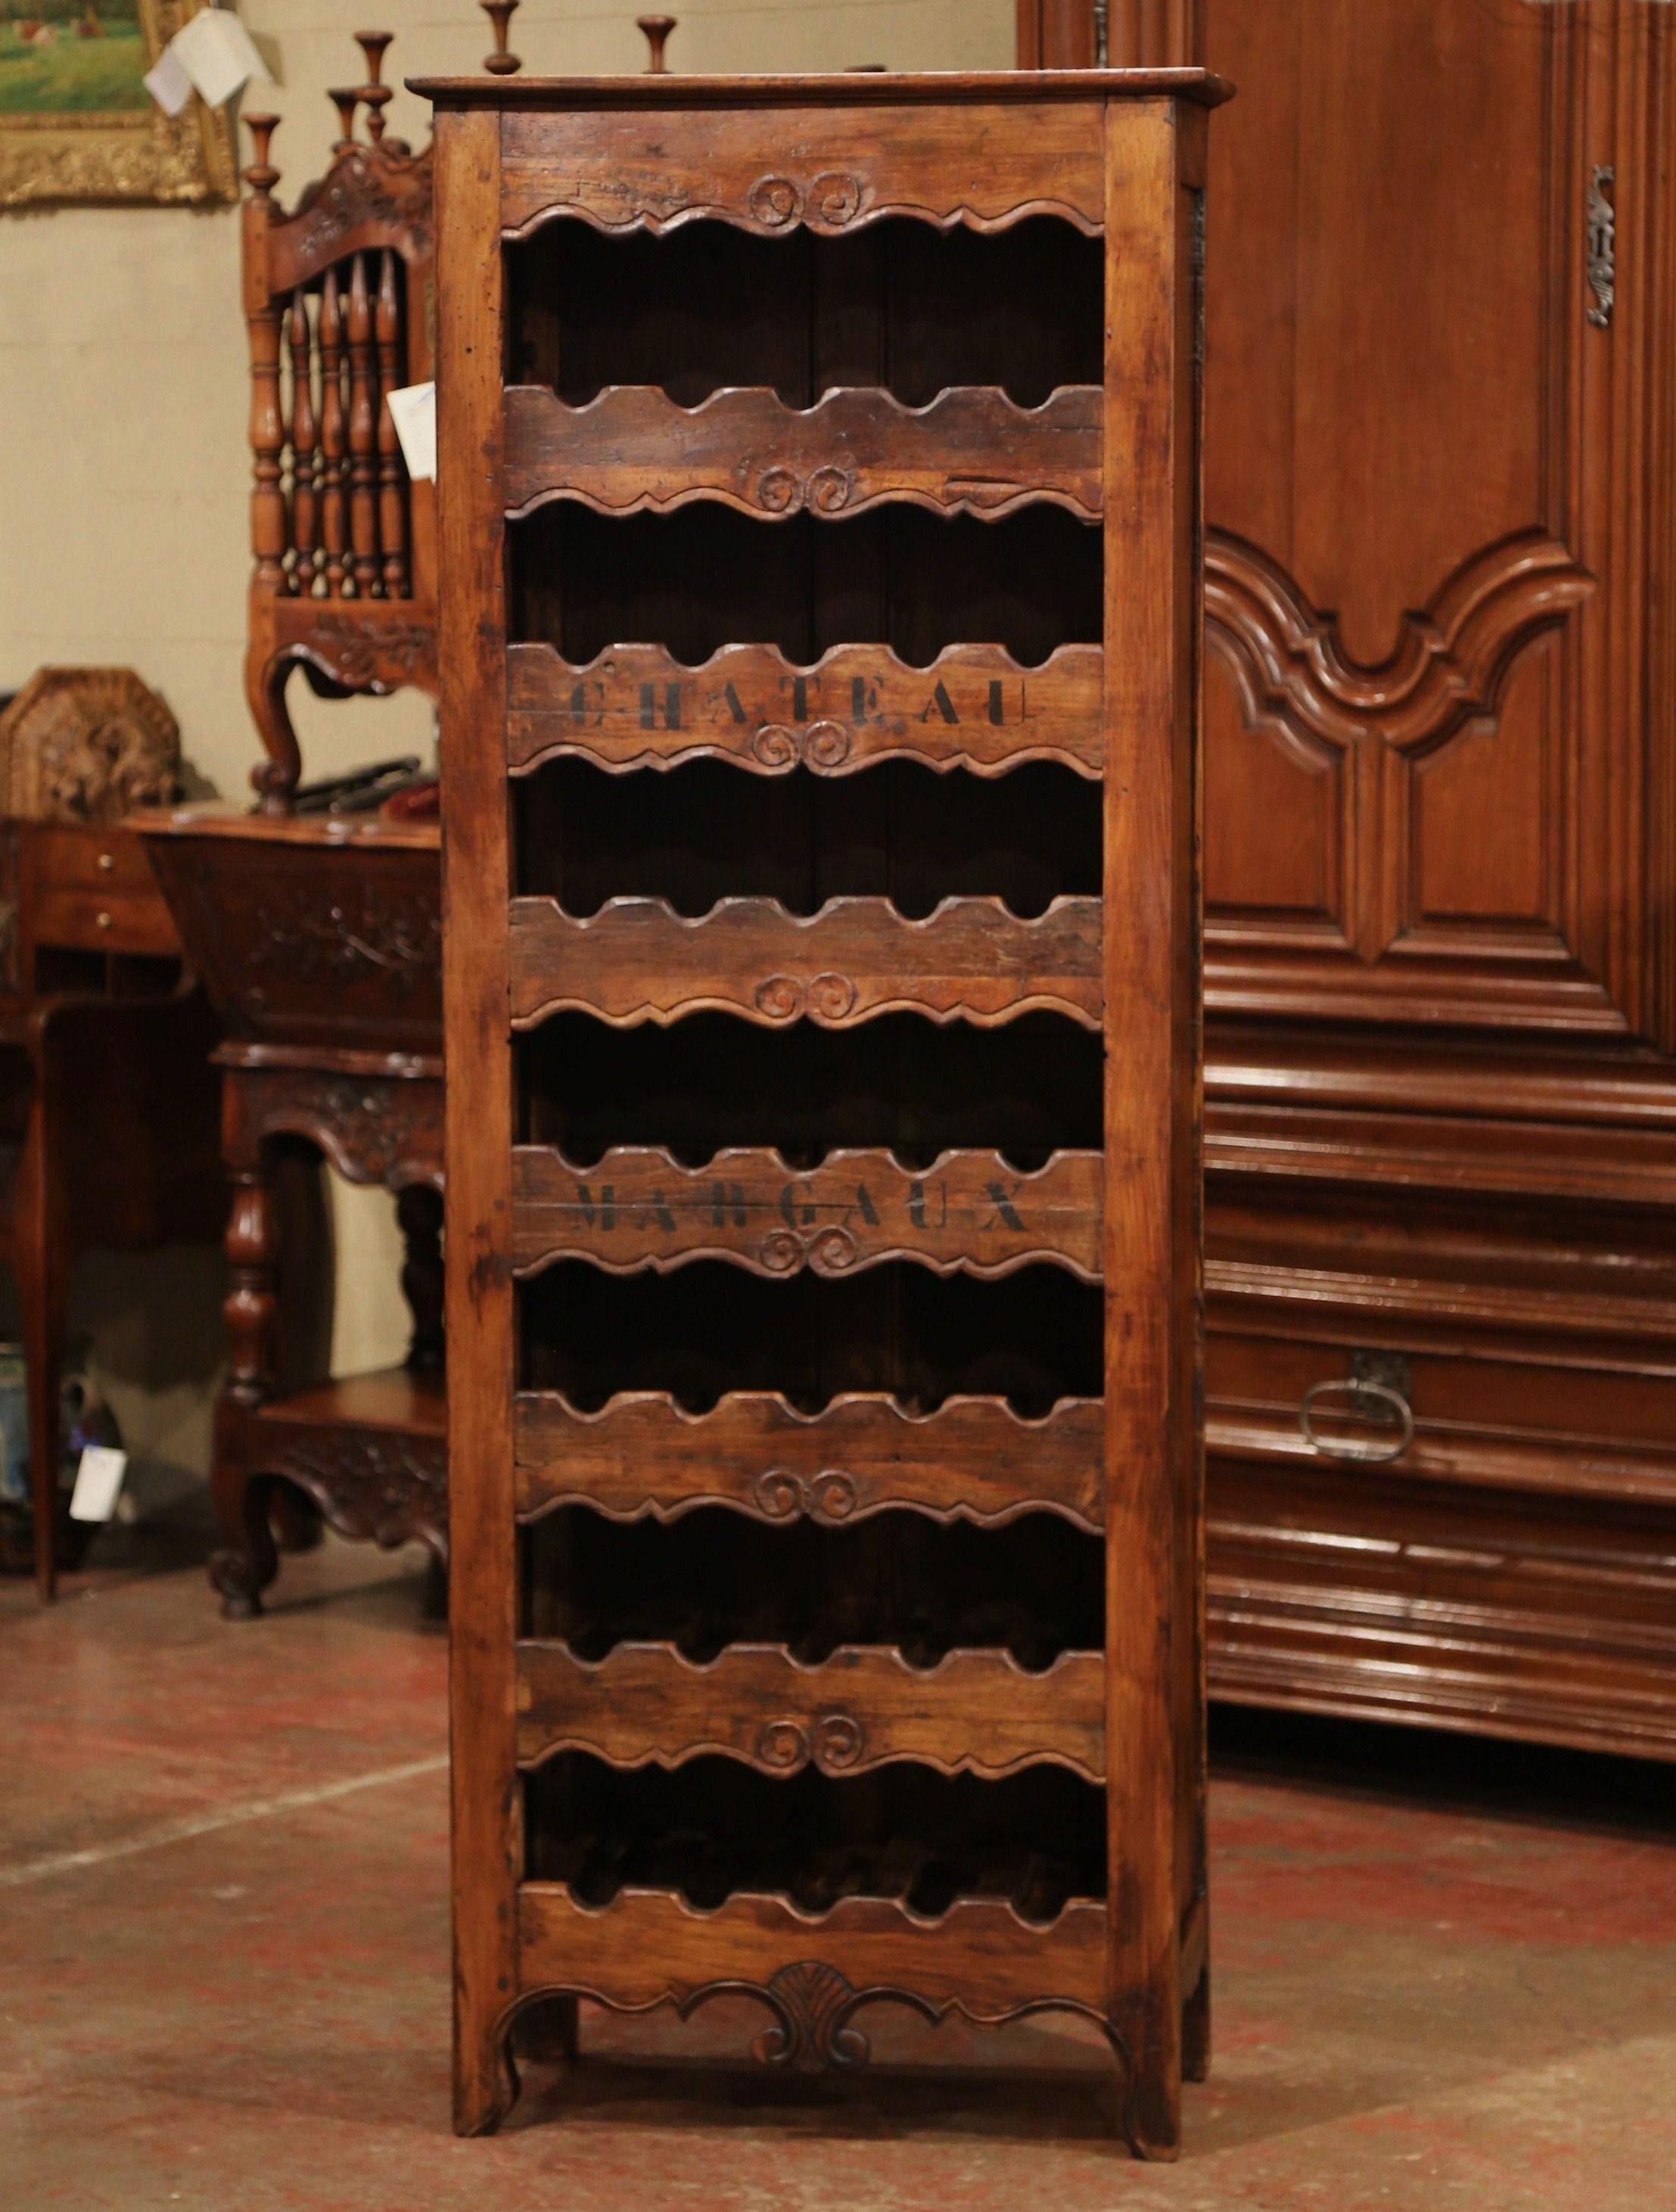 This elegant, antique wine storage cabinet was crafted in western France using old timber. The tall, simple pine cabinet sits on four small scroll feet under a scalloped apron. The useful, rustic storage cabinet features seven shelves with